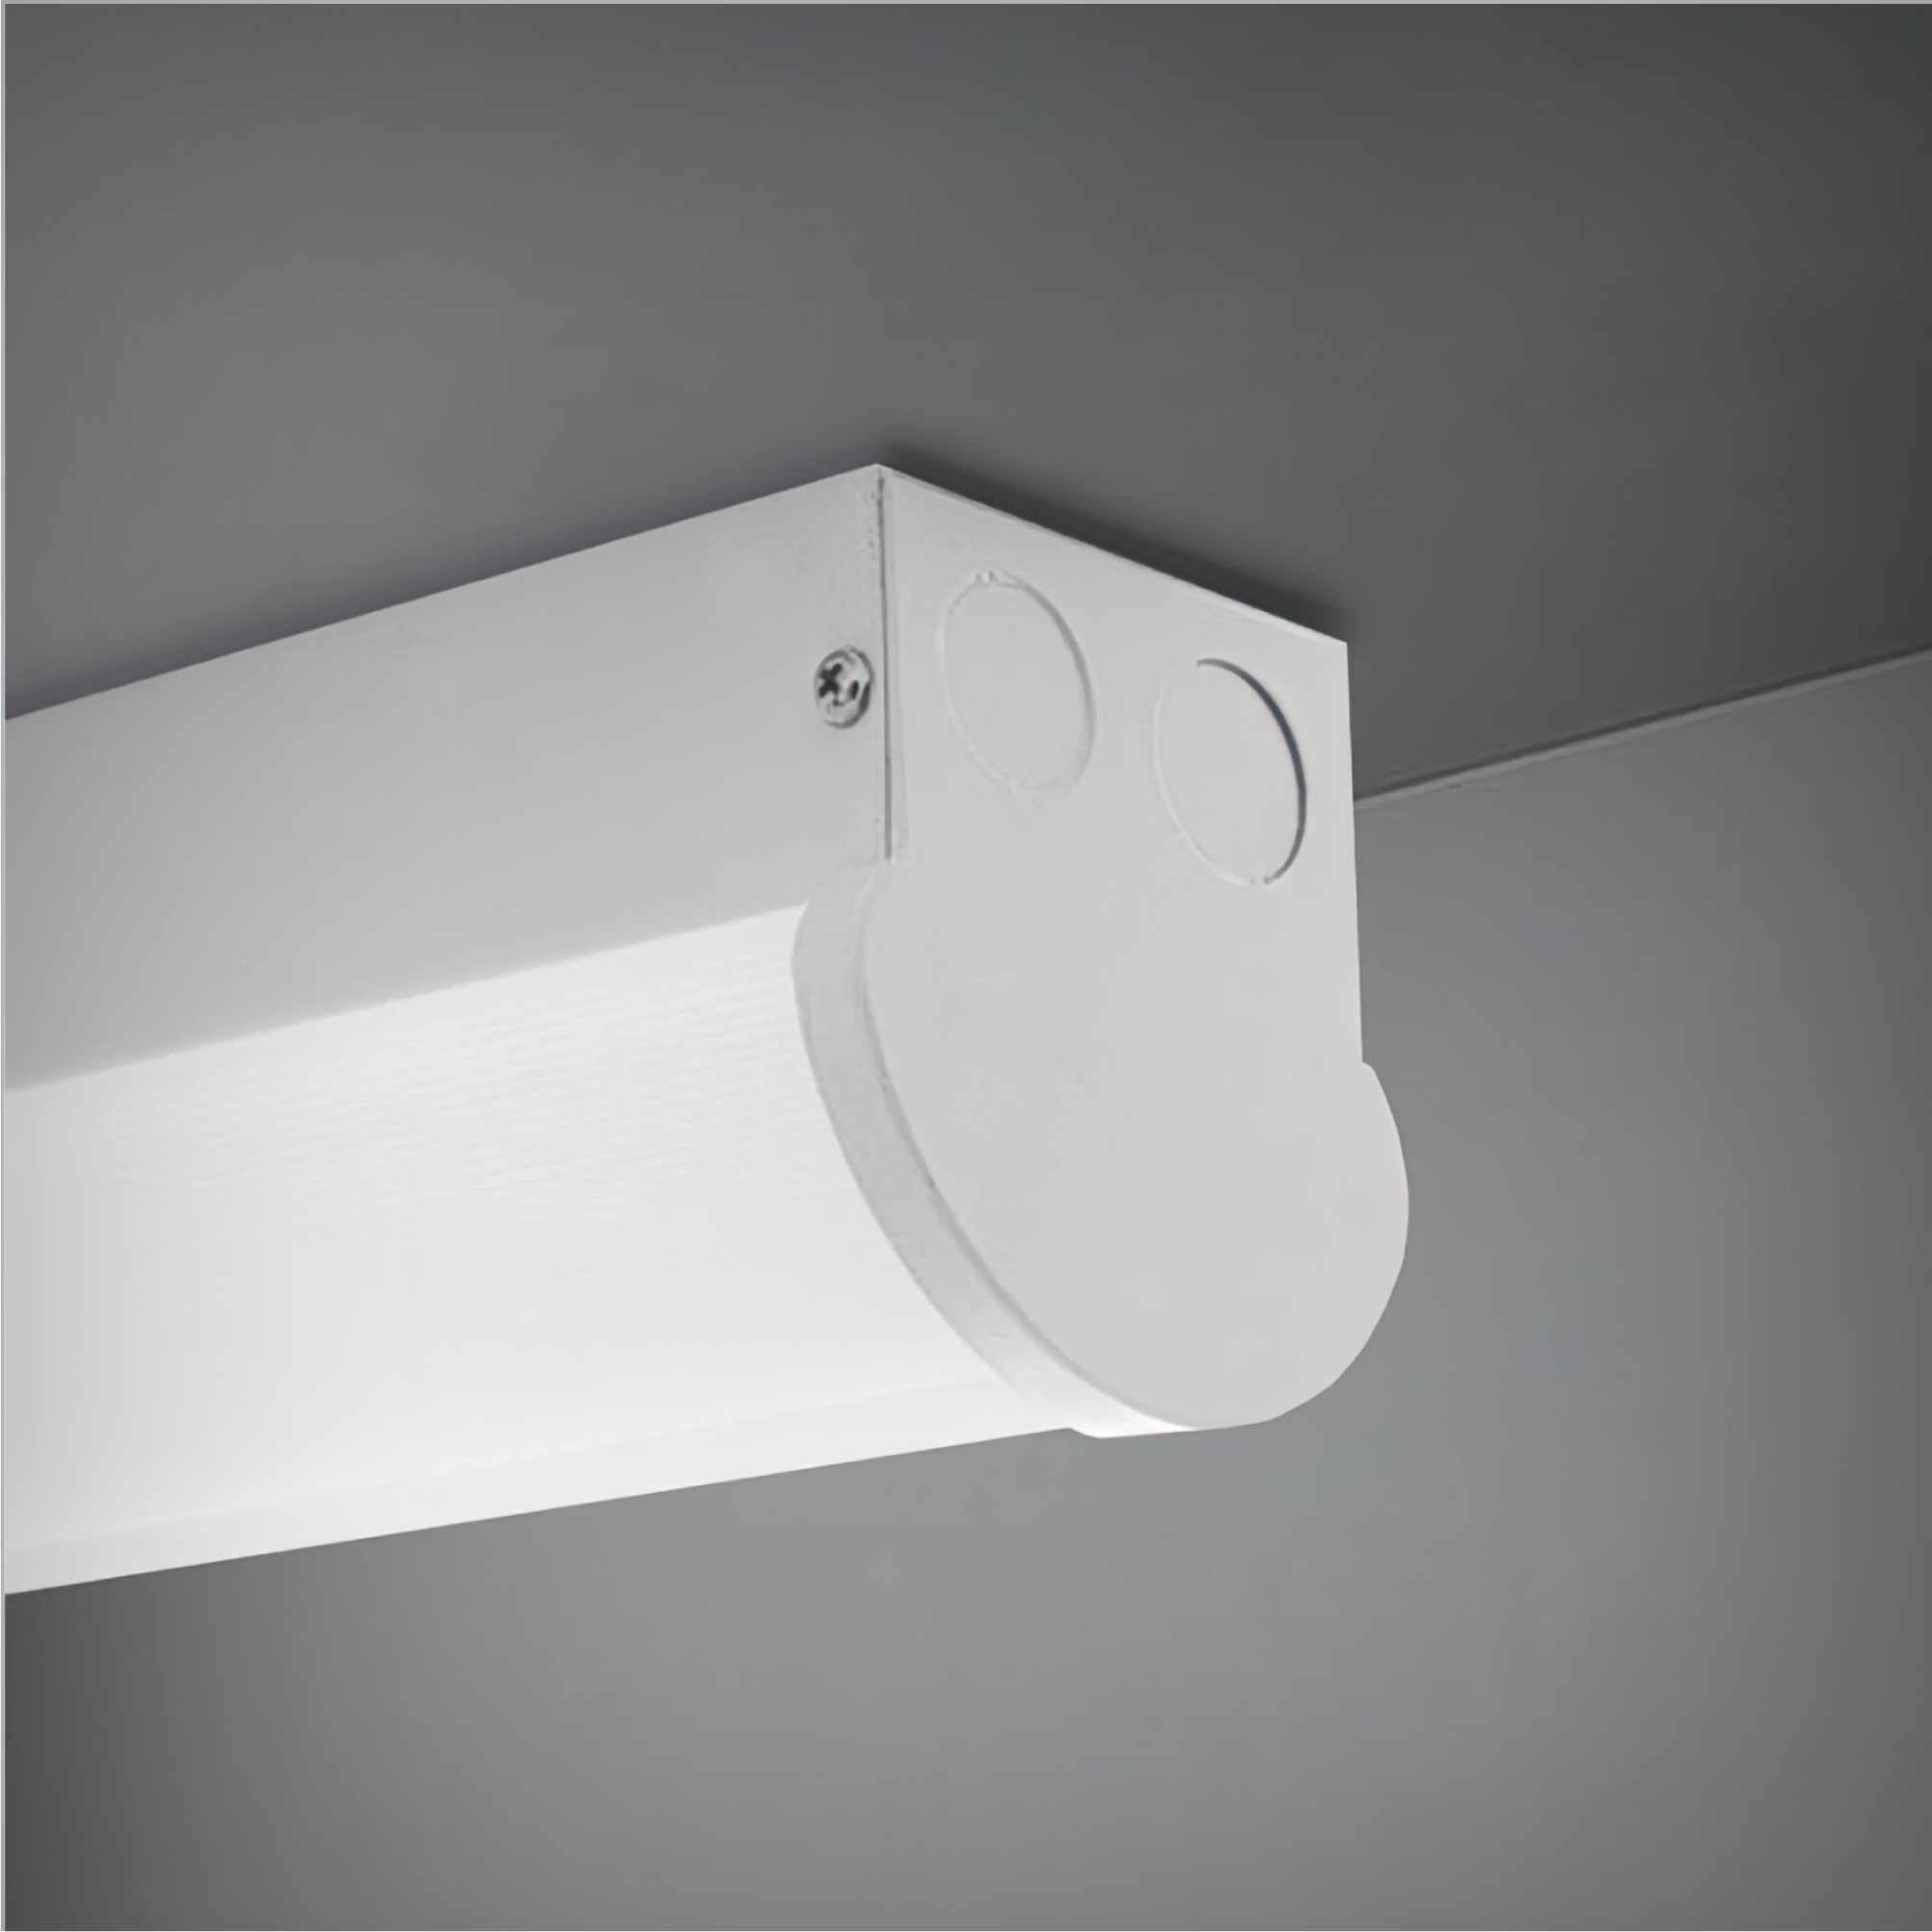 Wrapped Linear Hemisphere LED Ceiling Light with a 3.5-Inch size